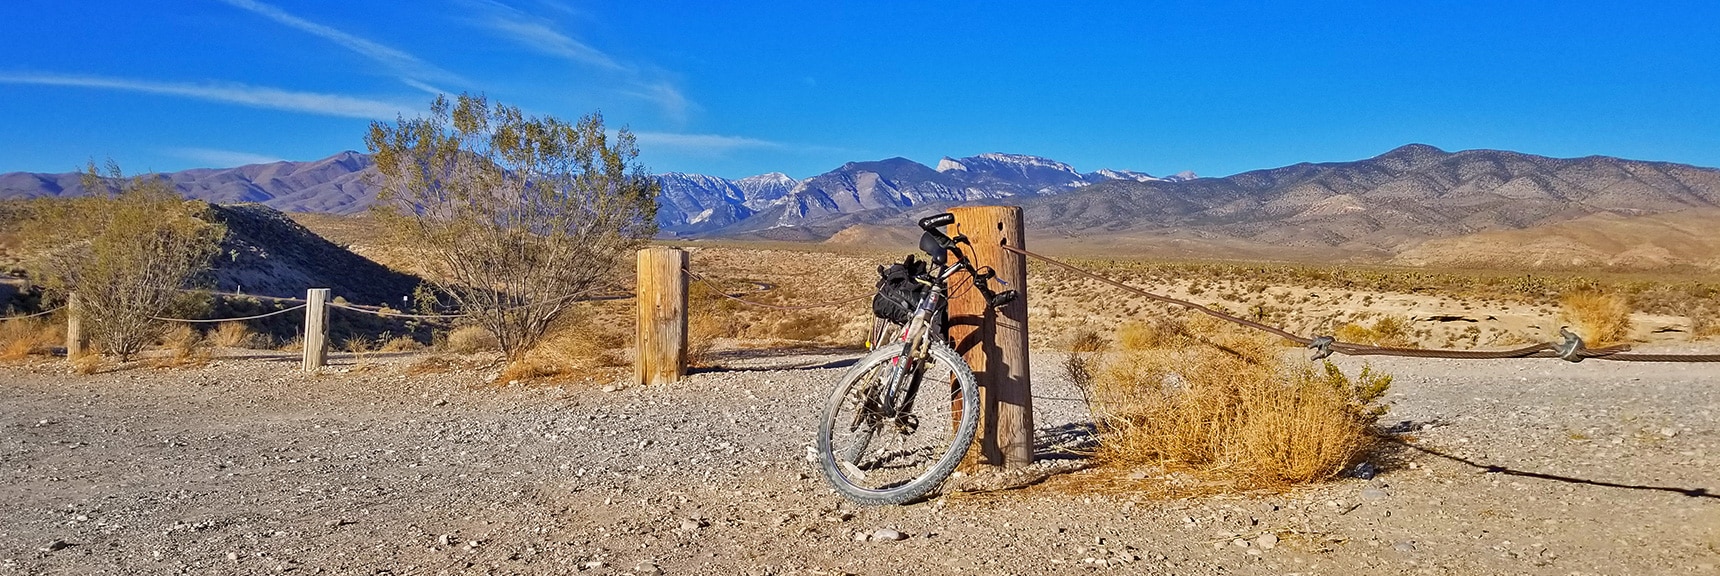 Starting Point: Parking Area at Junction of Kyle Canyon & Lower Harris Springs Rds | Harris Springs Rd, Harris Mountain Rd | Spring Mountains Wilderness, Nevada